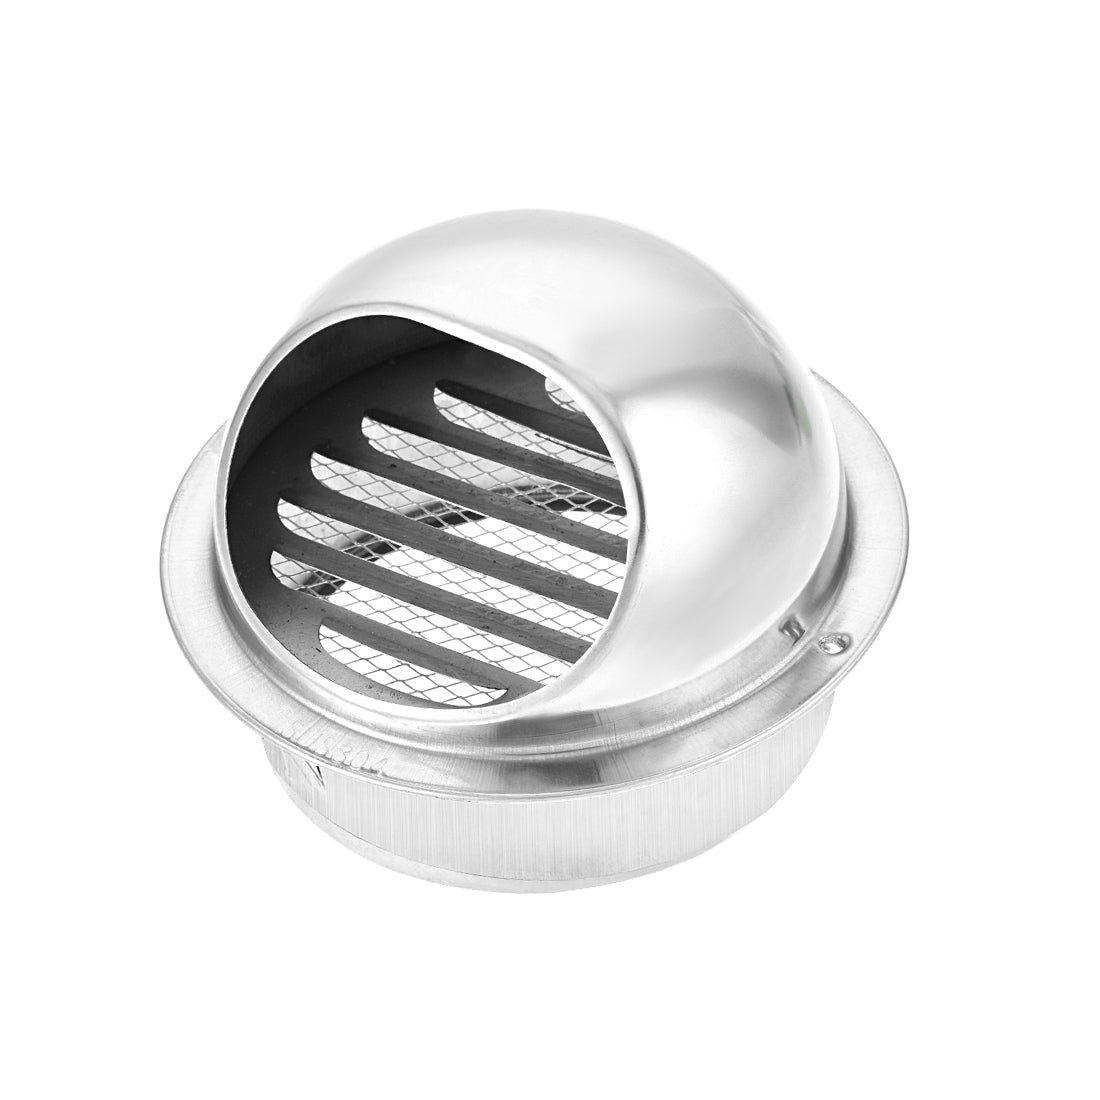 uxcell Uxcell Spherical Air Vent 4.7 Inch 120 mm 304 Stainless Steel Thickened Ducting Ventilation Exhaust Grille Cover Wall Vent